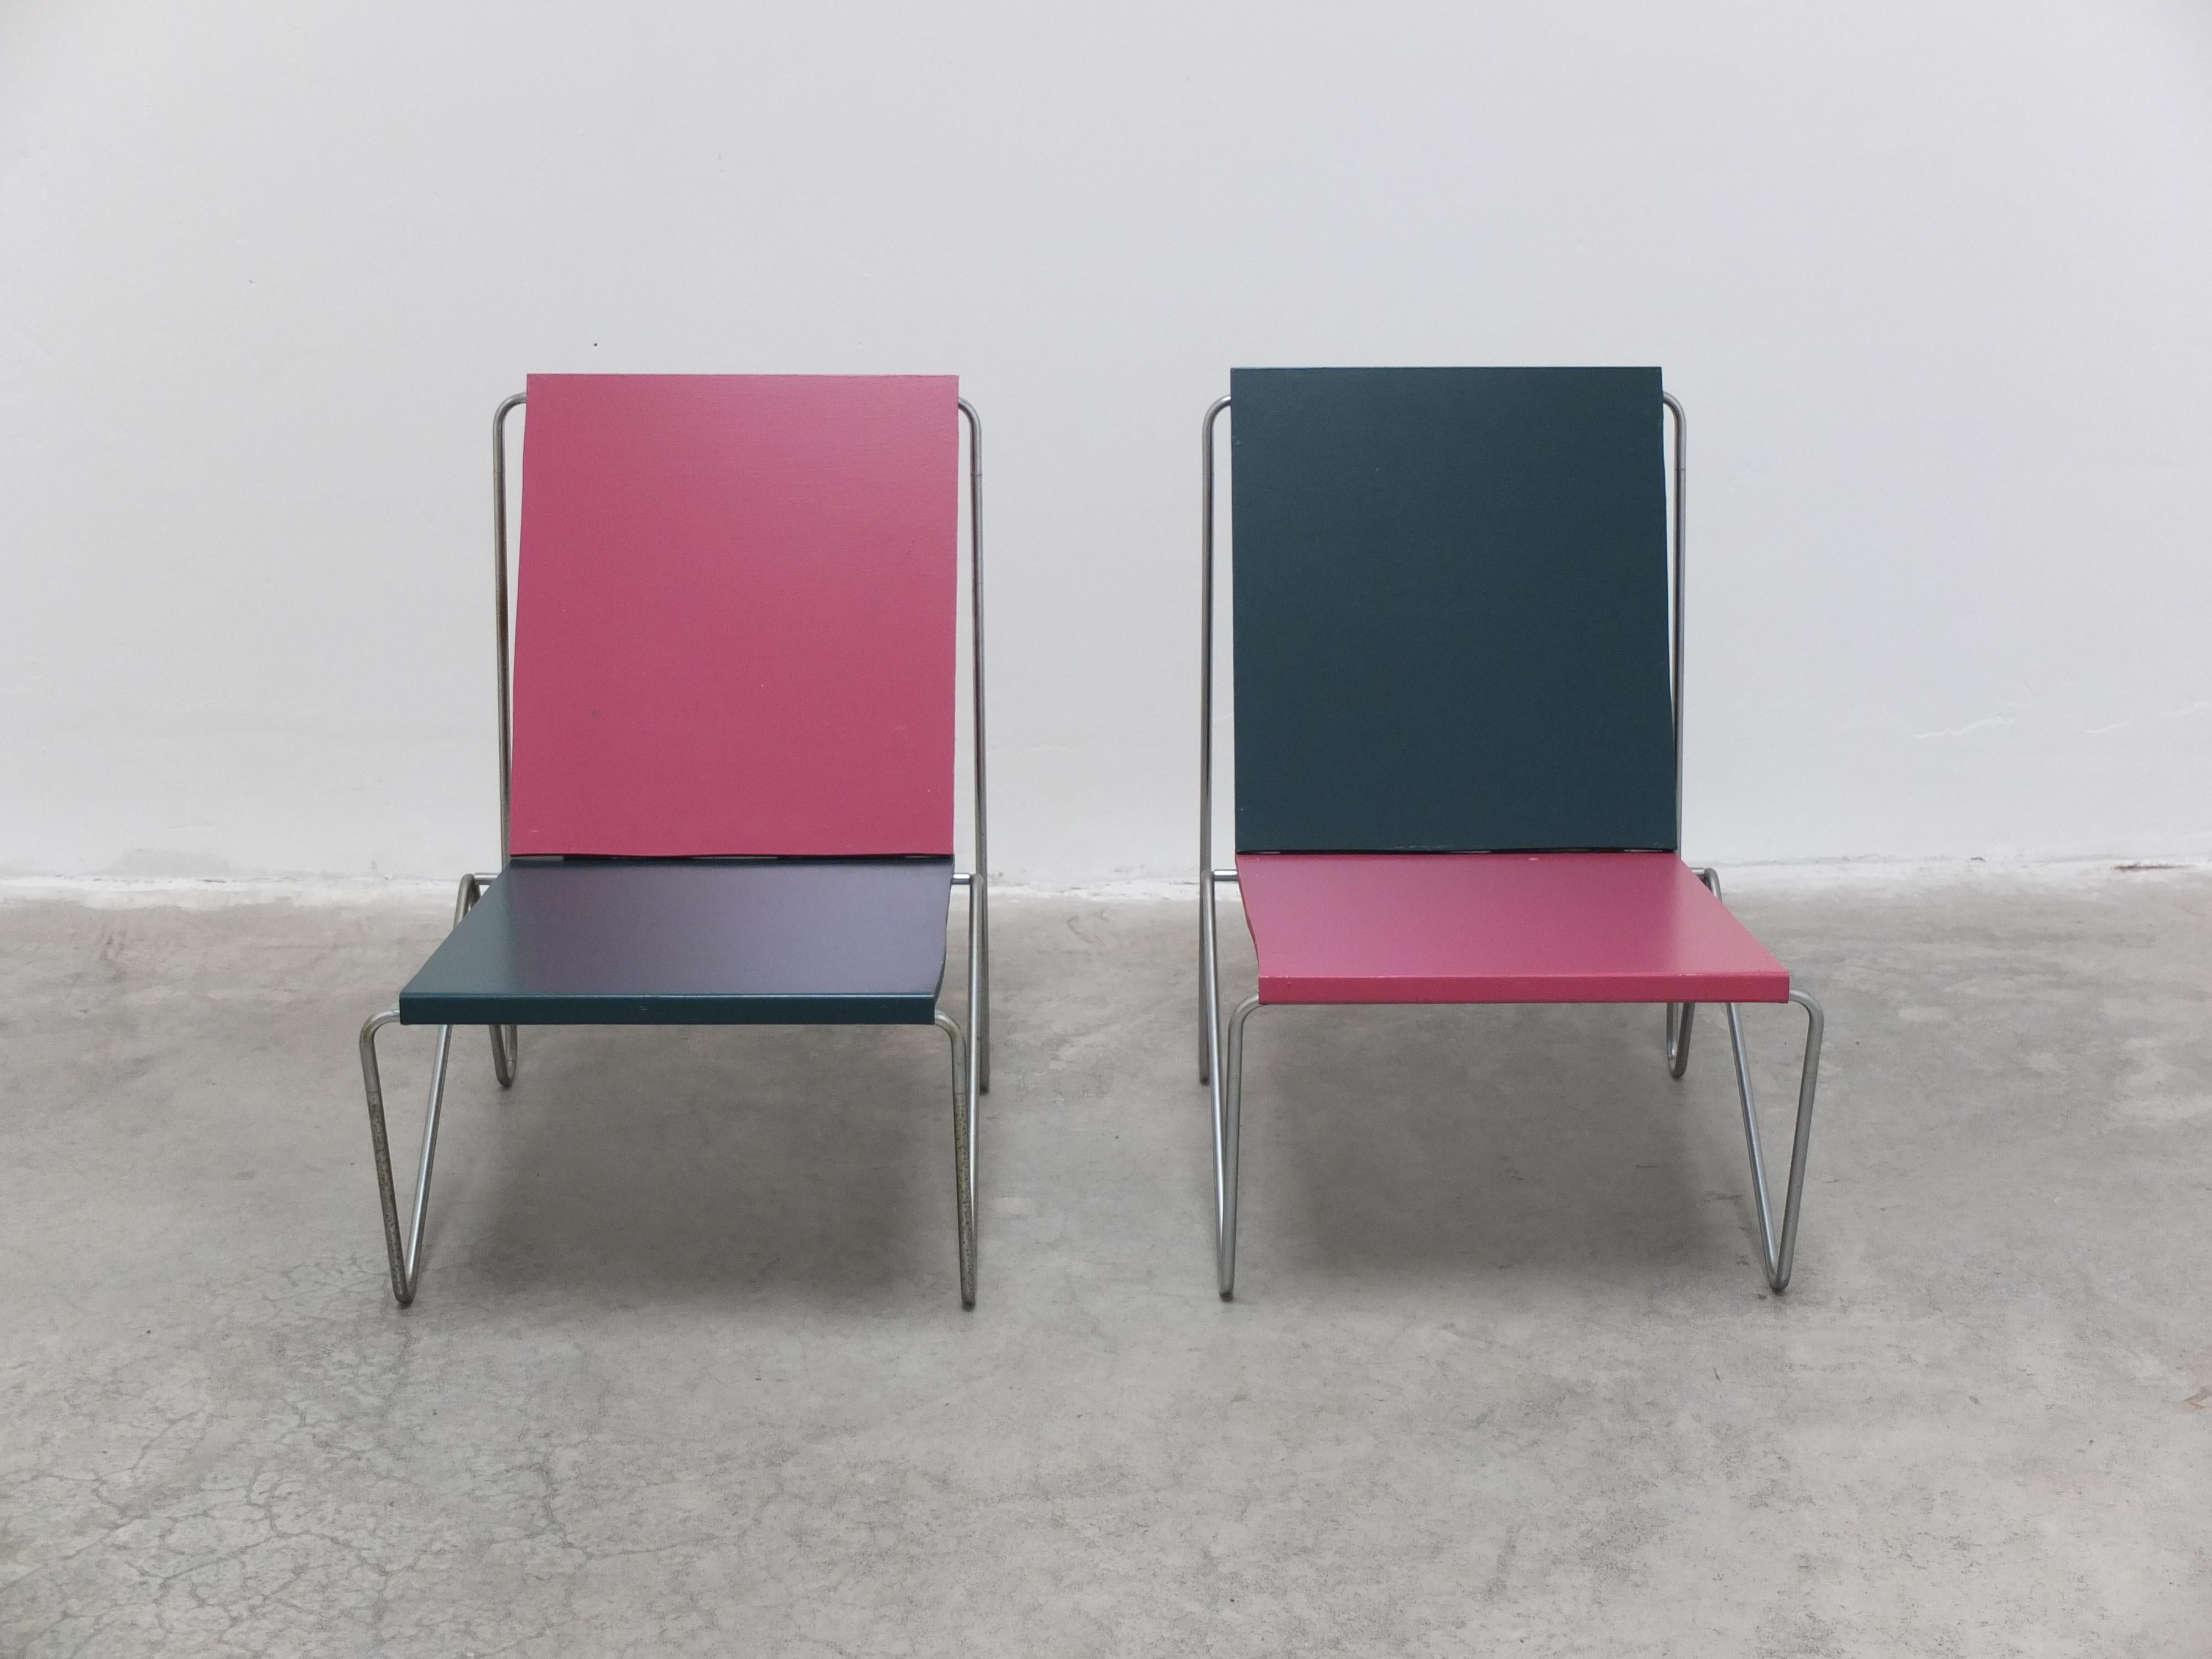 Unique pair of ‘Bachelor’ chairs designed by Verner Panton for Fritz Hansen in 1953. These examples were bought around 1971 together with a rare matching table which still has the label with production year. The chairs have a signature minimalist